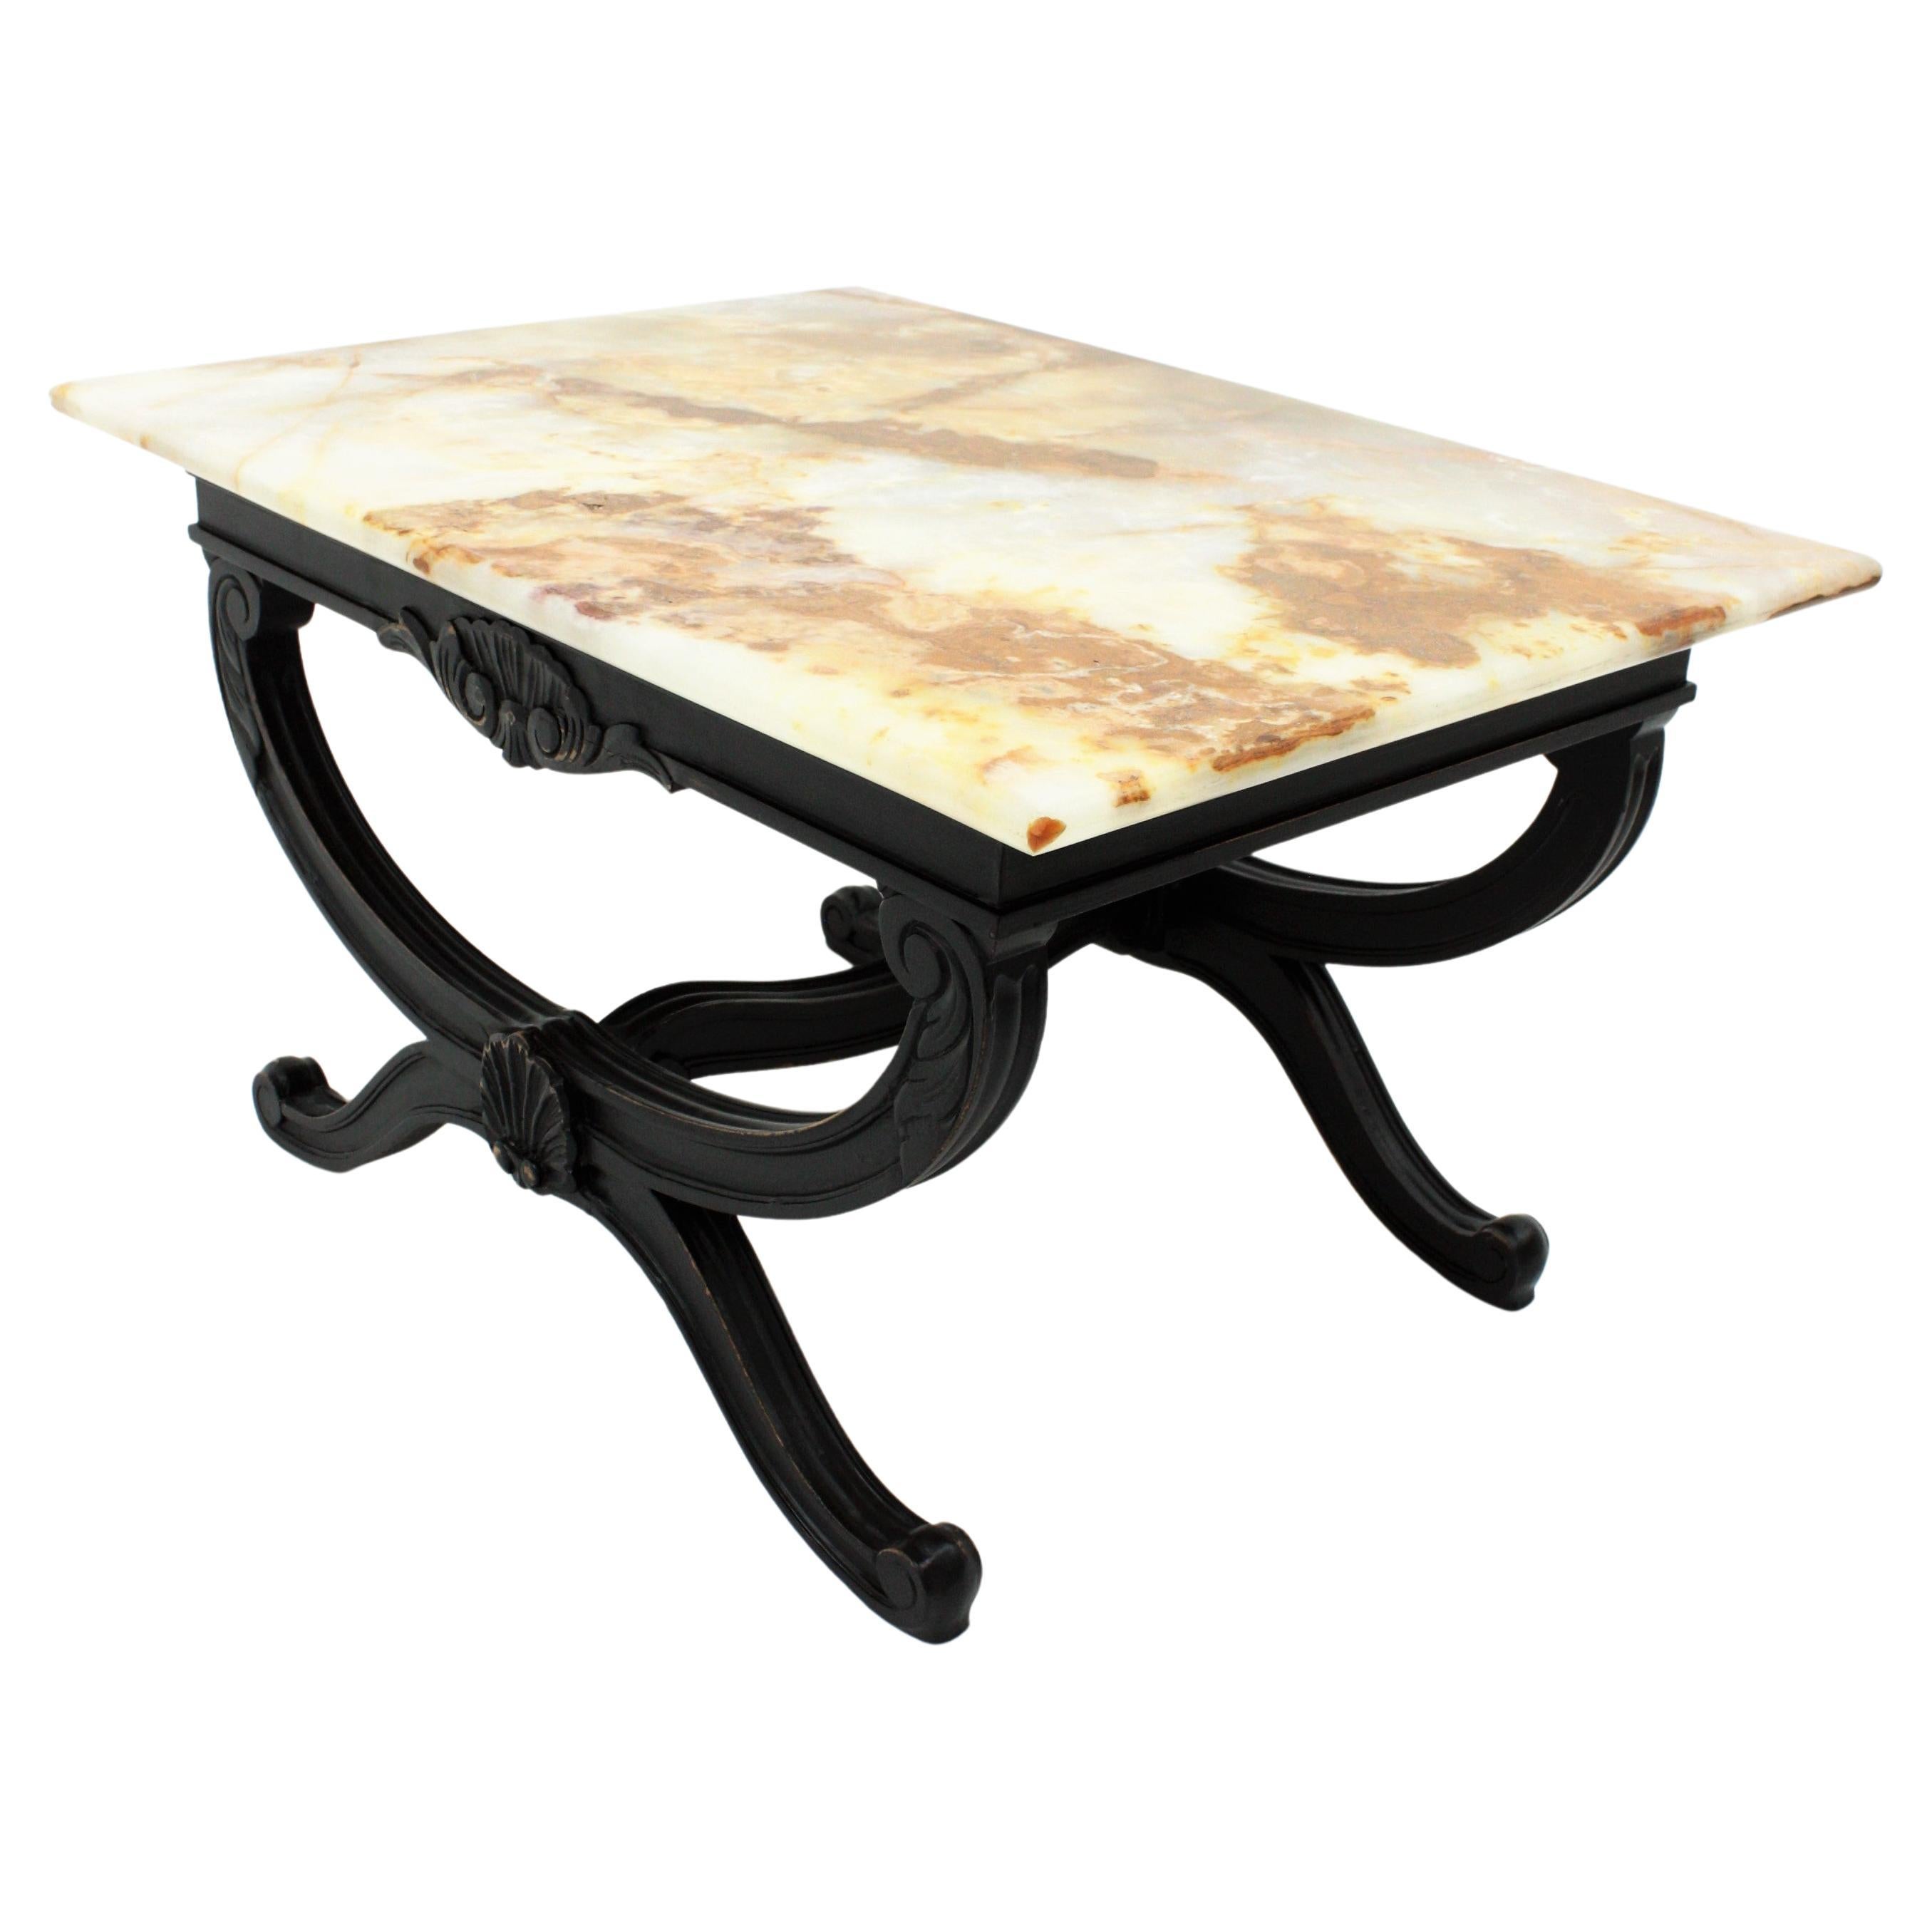 1950s French Carved Wood Coffee Table with Onyx Top For Sale